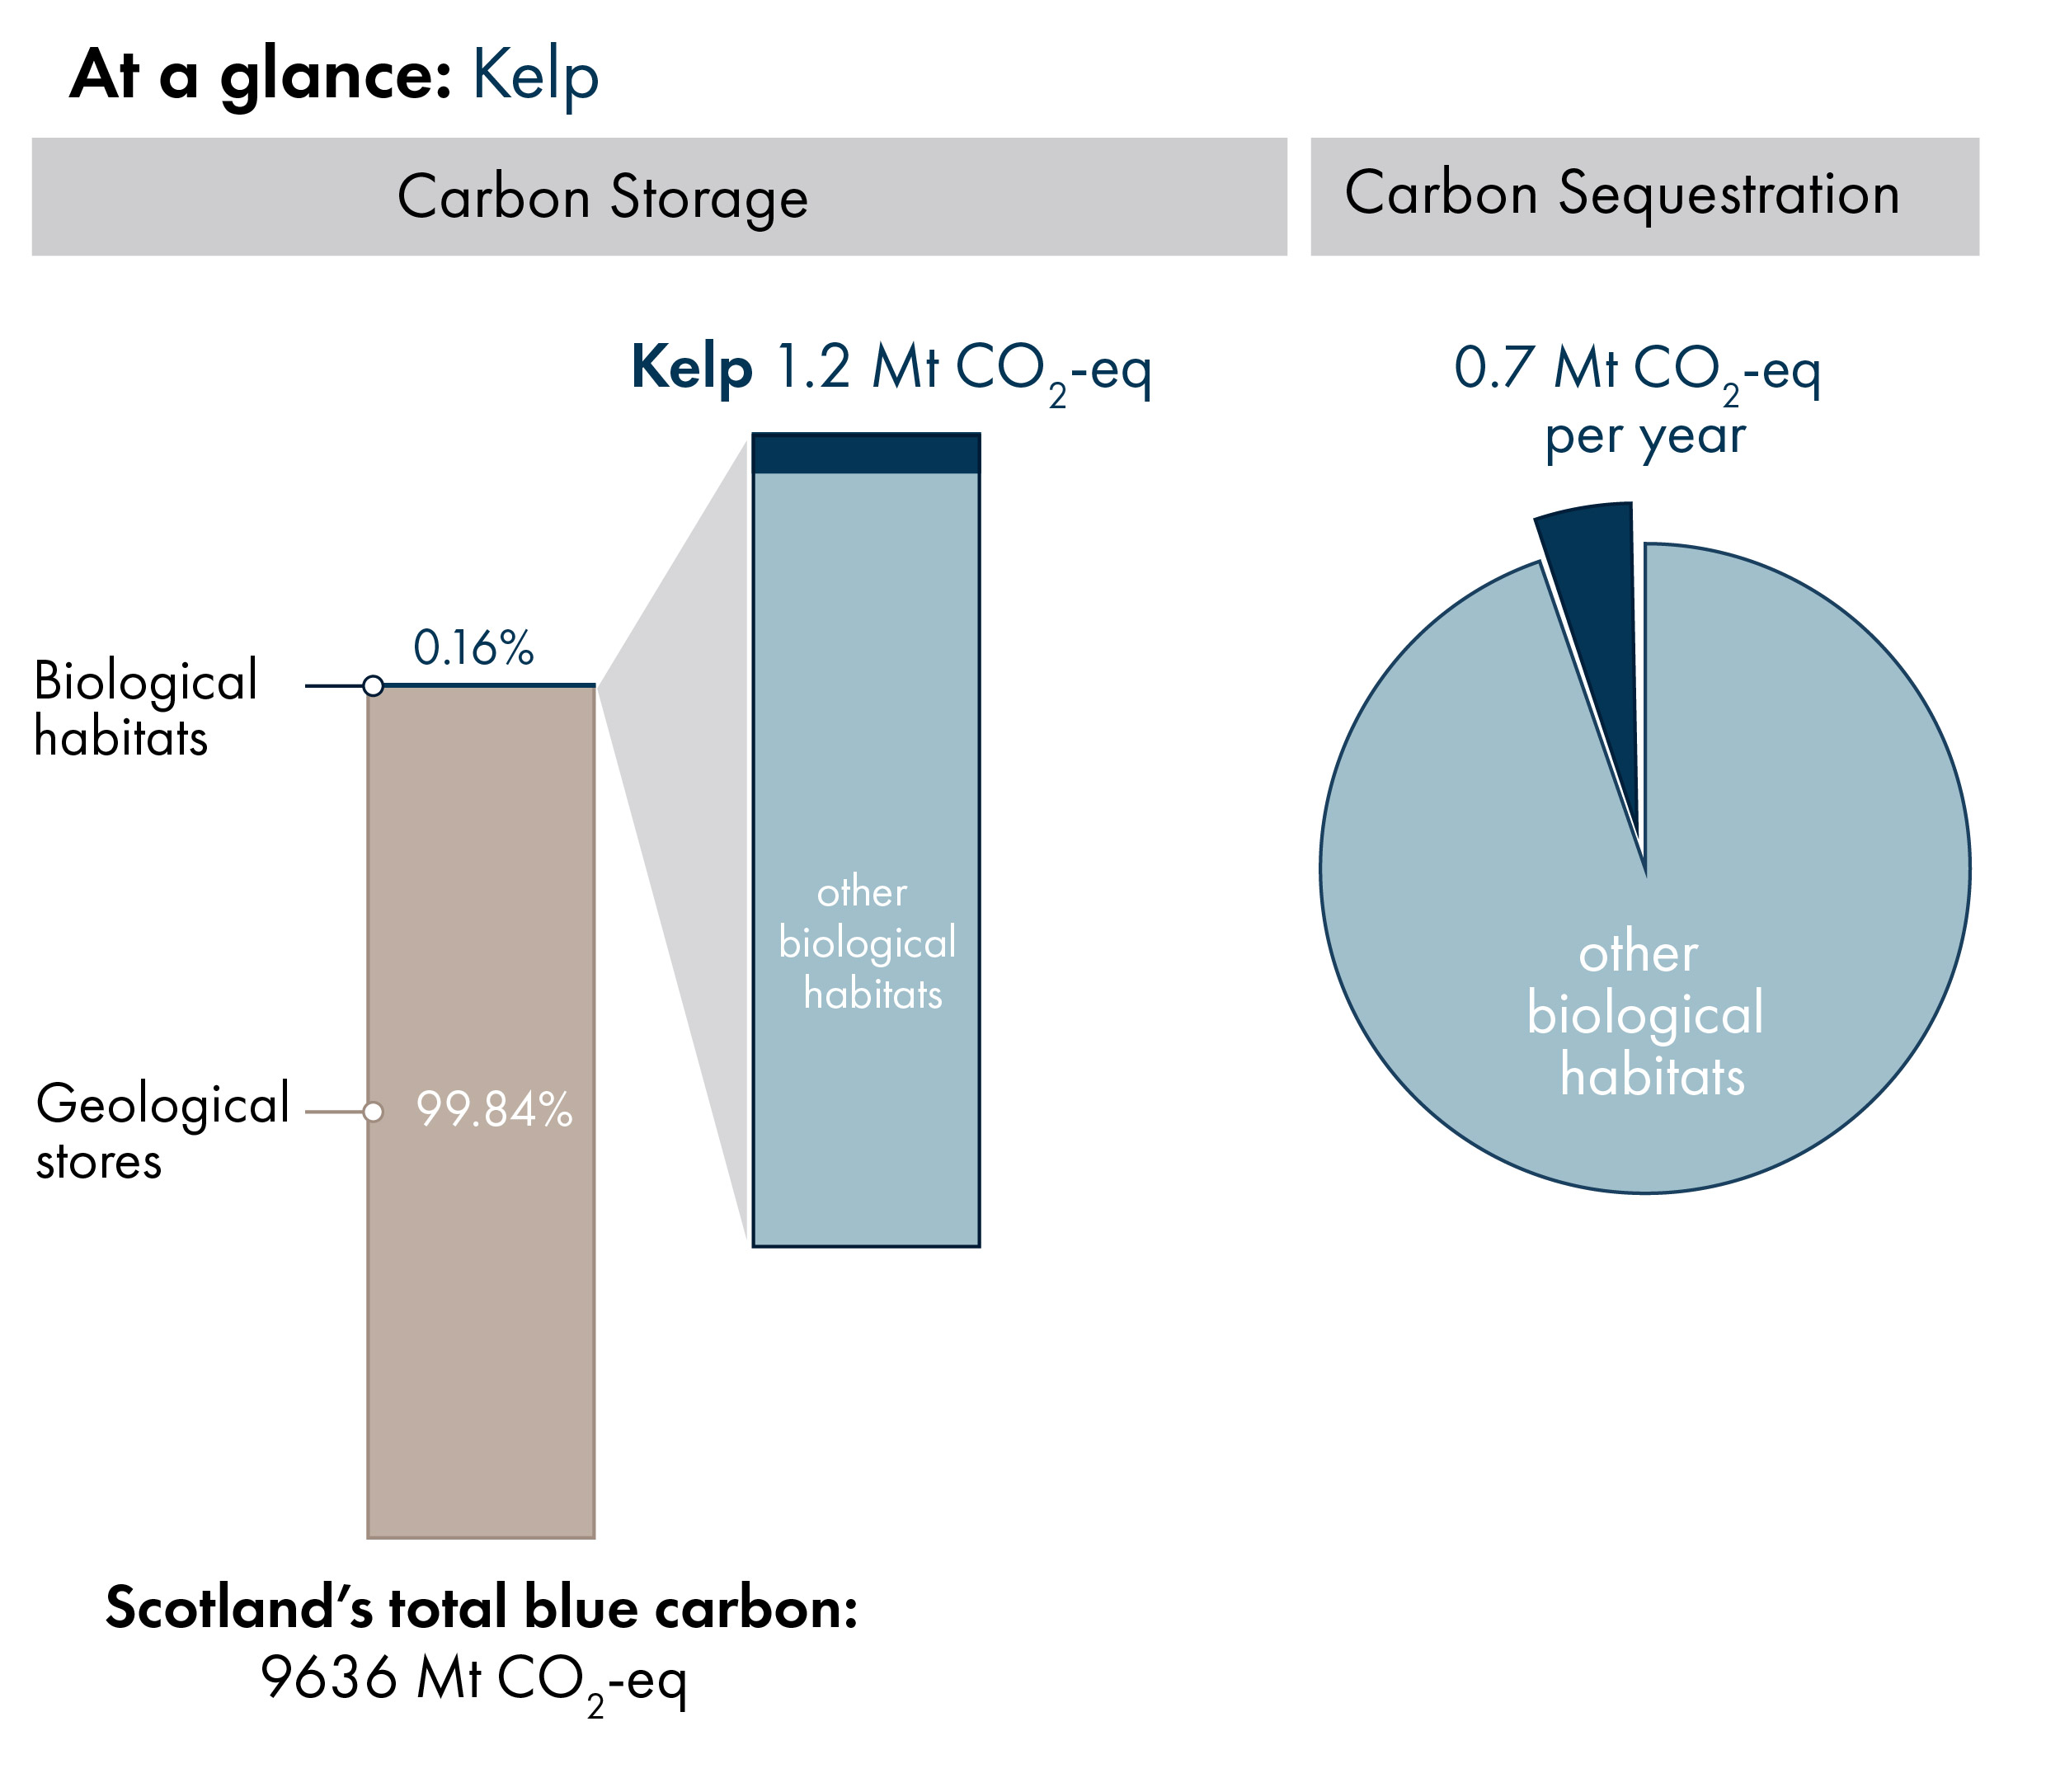 Bar charts showing the proportion of Scotland's blue carbon which is in geological stores (99.84%) versus carbon in biological habitats and species (0.16%). Inset bar chart shows the proportion of carbon in biological habitats which is kelp carbon storage (1.2 megatonnes of carbon dioxide equivalent). Pie chart showing, out of all biological habitats, the proportion which is sequestered annually by kelp.